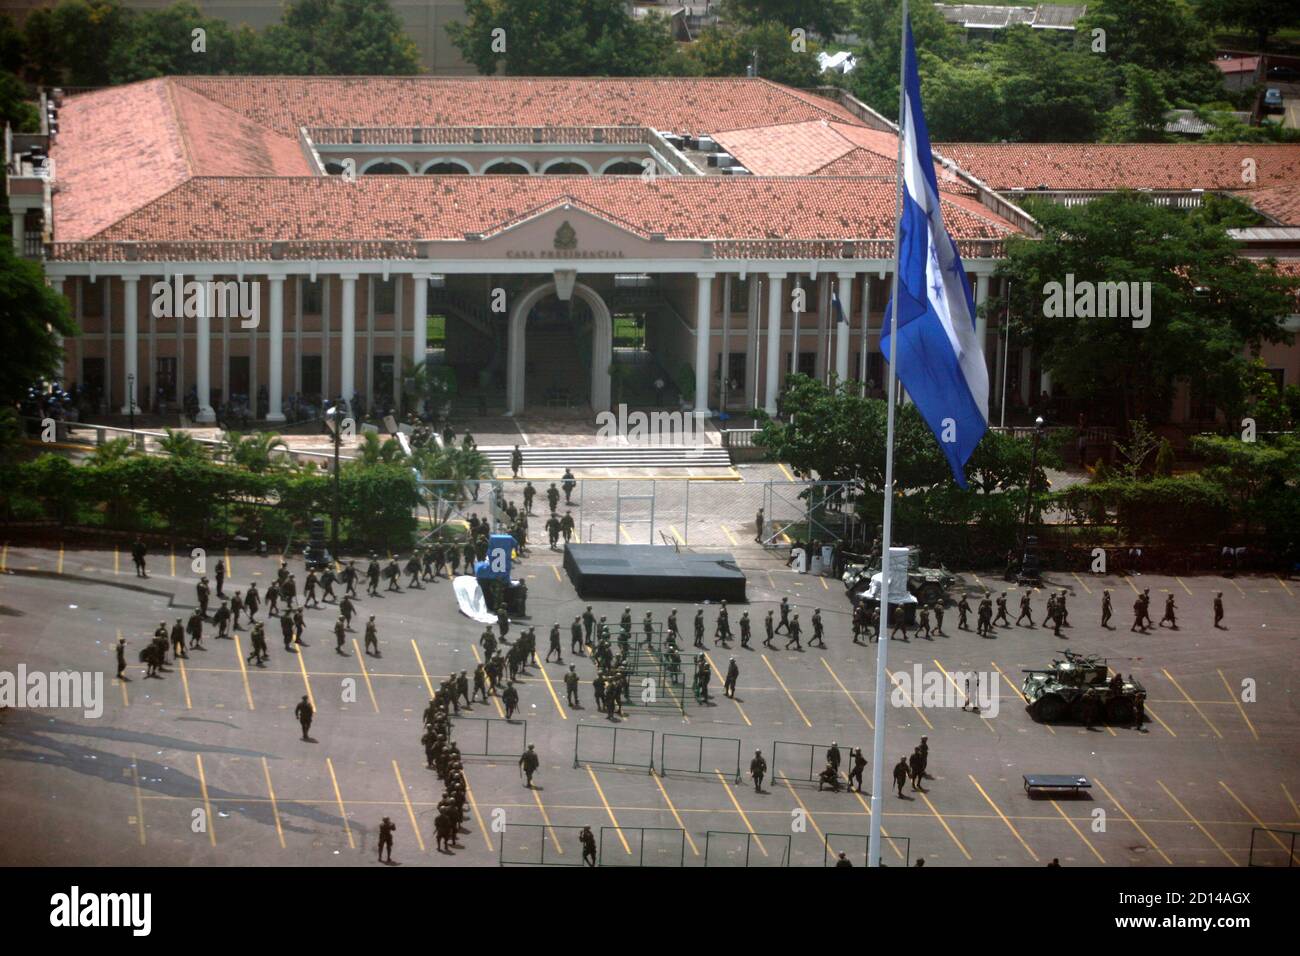 Soldiers walk in front of Presidential residence in Tegucigalpa June 29, 2009.Leftist Latin American leaders rallied around ousted Zelaya on Monday and tried to thrash out a response to an army coup that sparked protests in the impoverished nation and drew worldwide condemnation. Pro-Zelaya demonstrators defied an overnight curfew and held a vigil by the presidential palace in Tegucigalpa, while Venezuela's firebrand President Hugo Chavez led talks with Zelaya and other allies in neighboring Nicaragua. REUTERS/Edgard Garrido (HONDURAS CONFLICT MILITARY POLITICS) Stock Photo